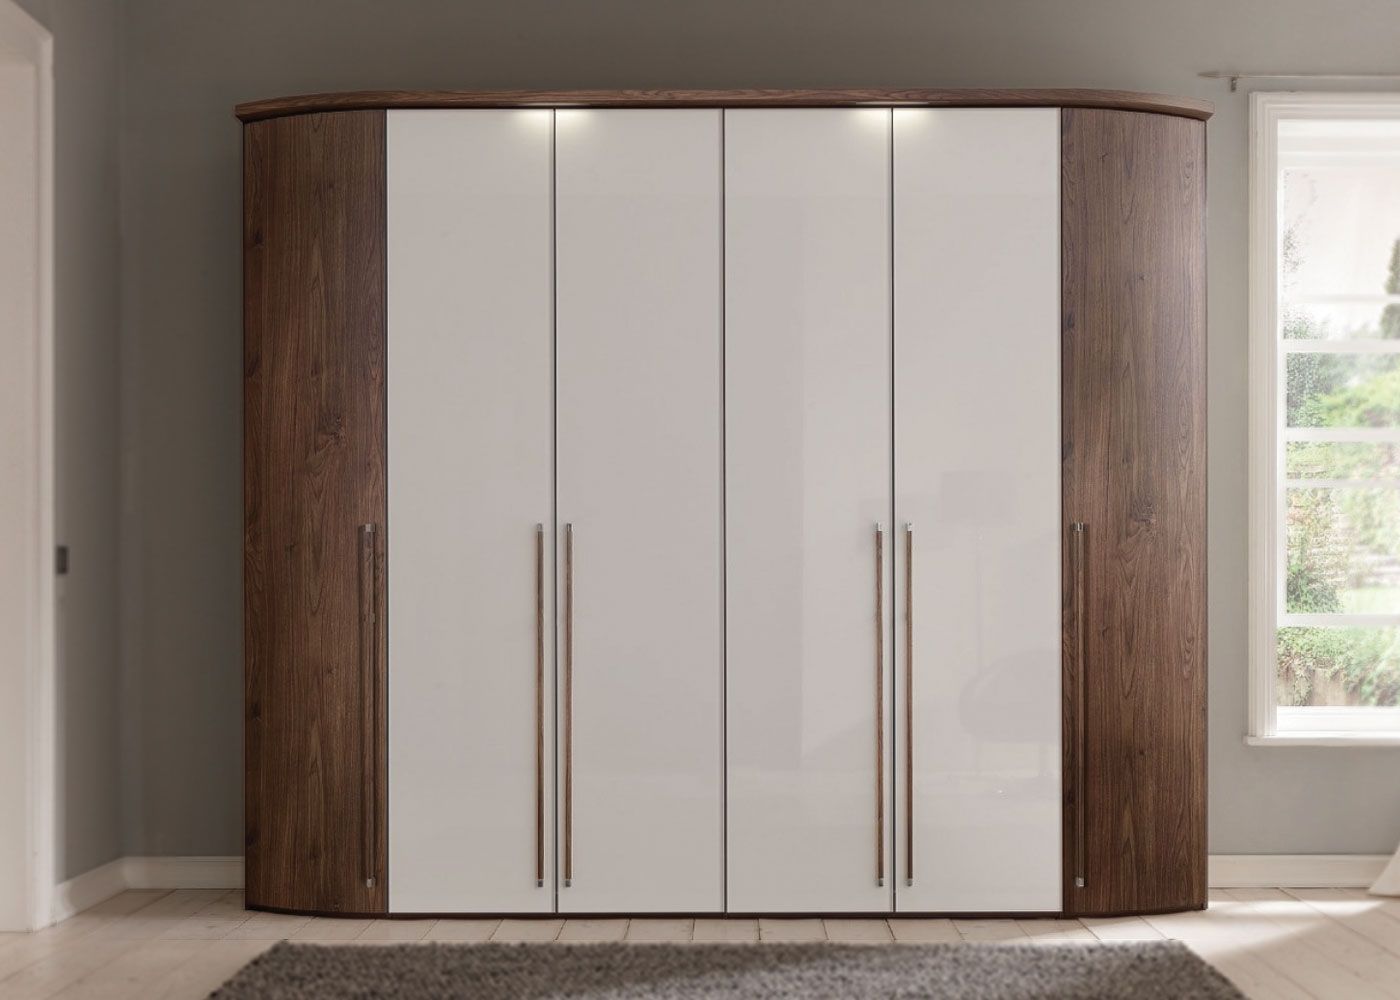 Nolte Möbel Horizon T100 Wardrobe With Curved Sides – Midfurn Furniture  Superstore Inside Curved Wardrobes Doors (Gallery 10 of 20)